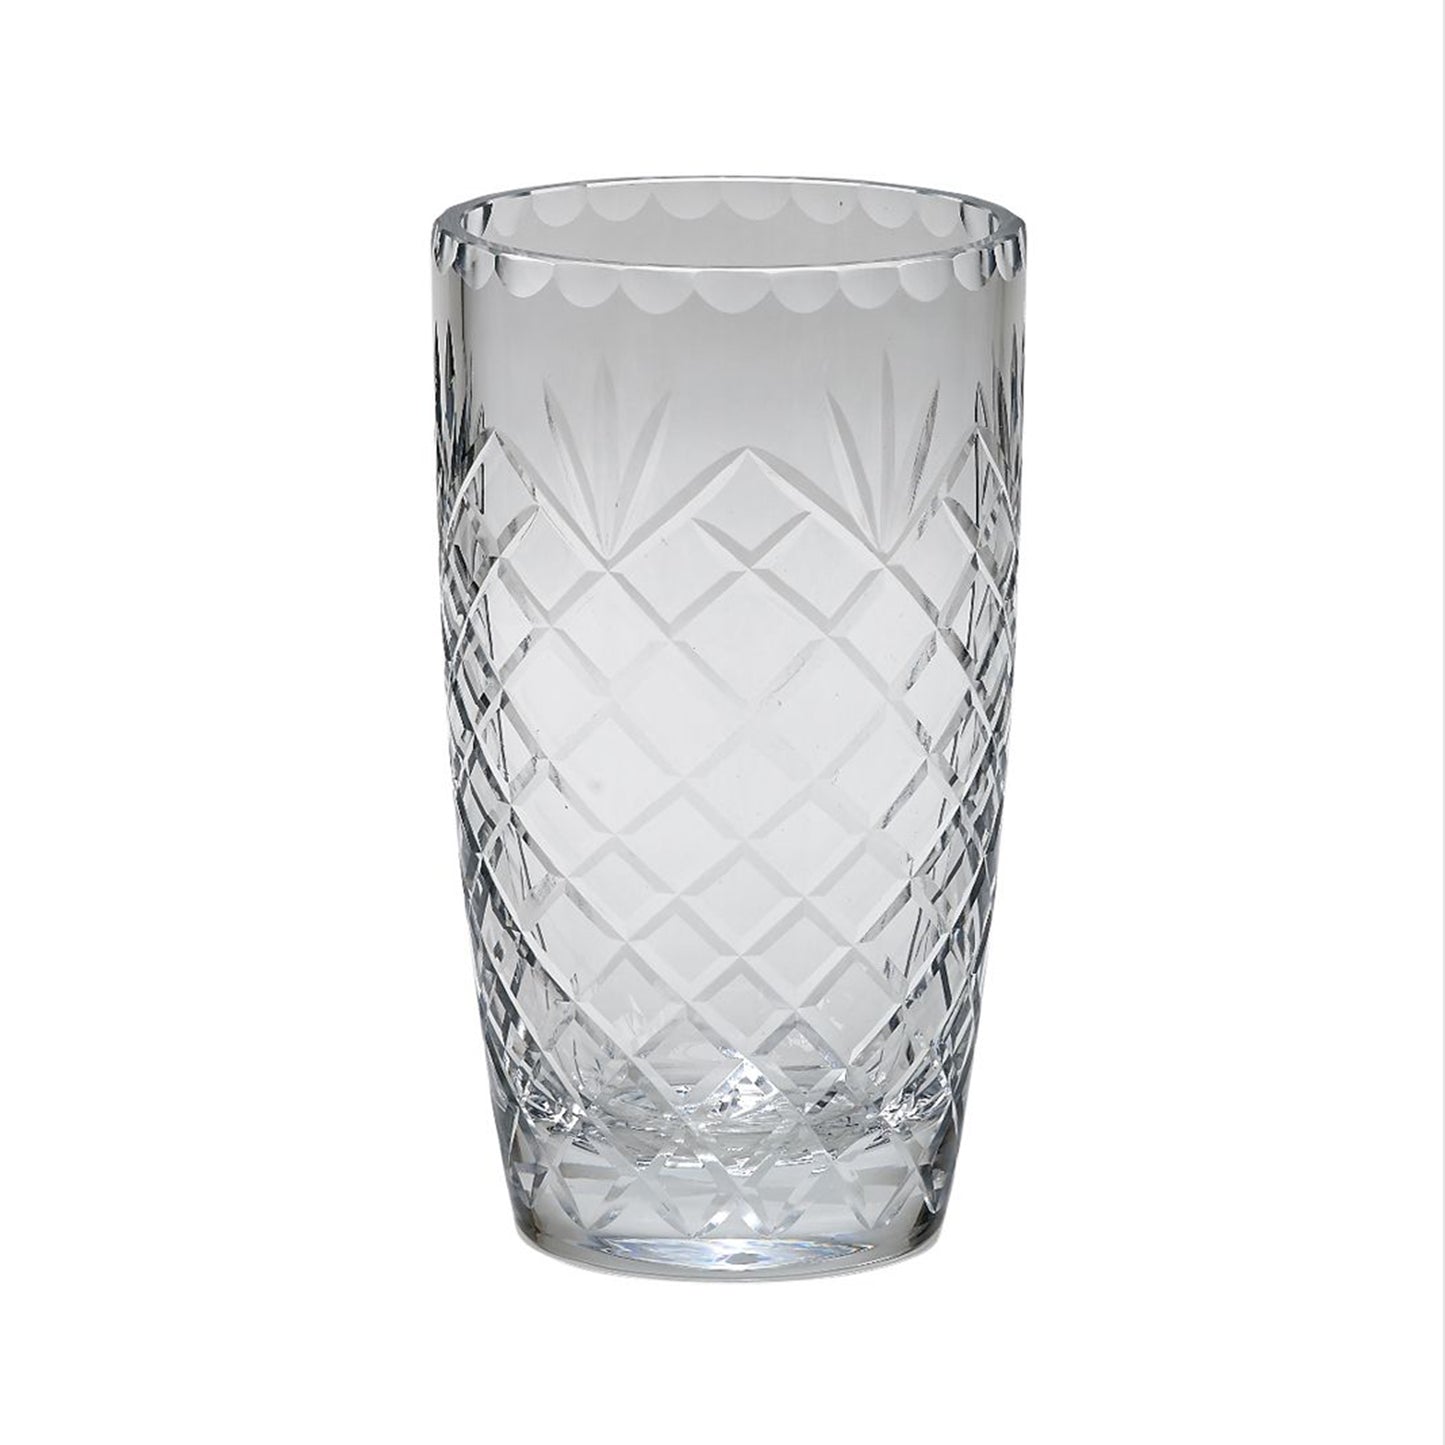 Optic Crystal Vase With Medallion Ll Pattern, 9.75"